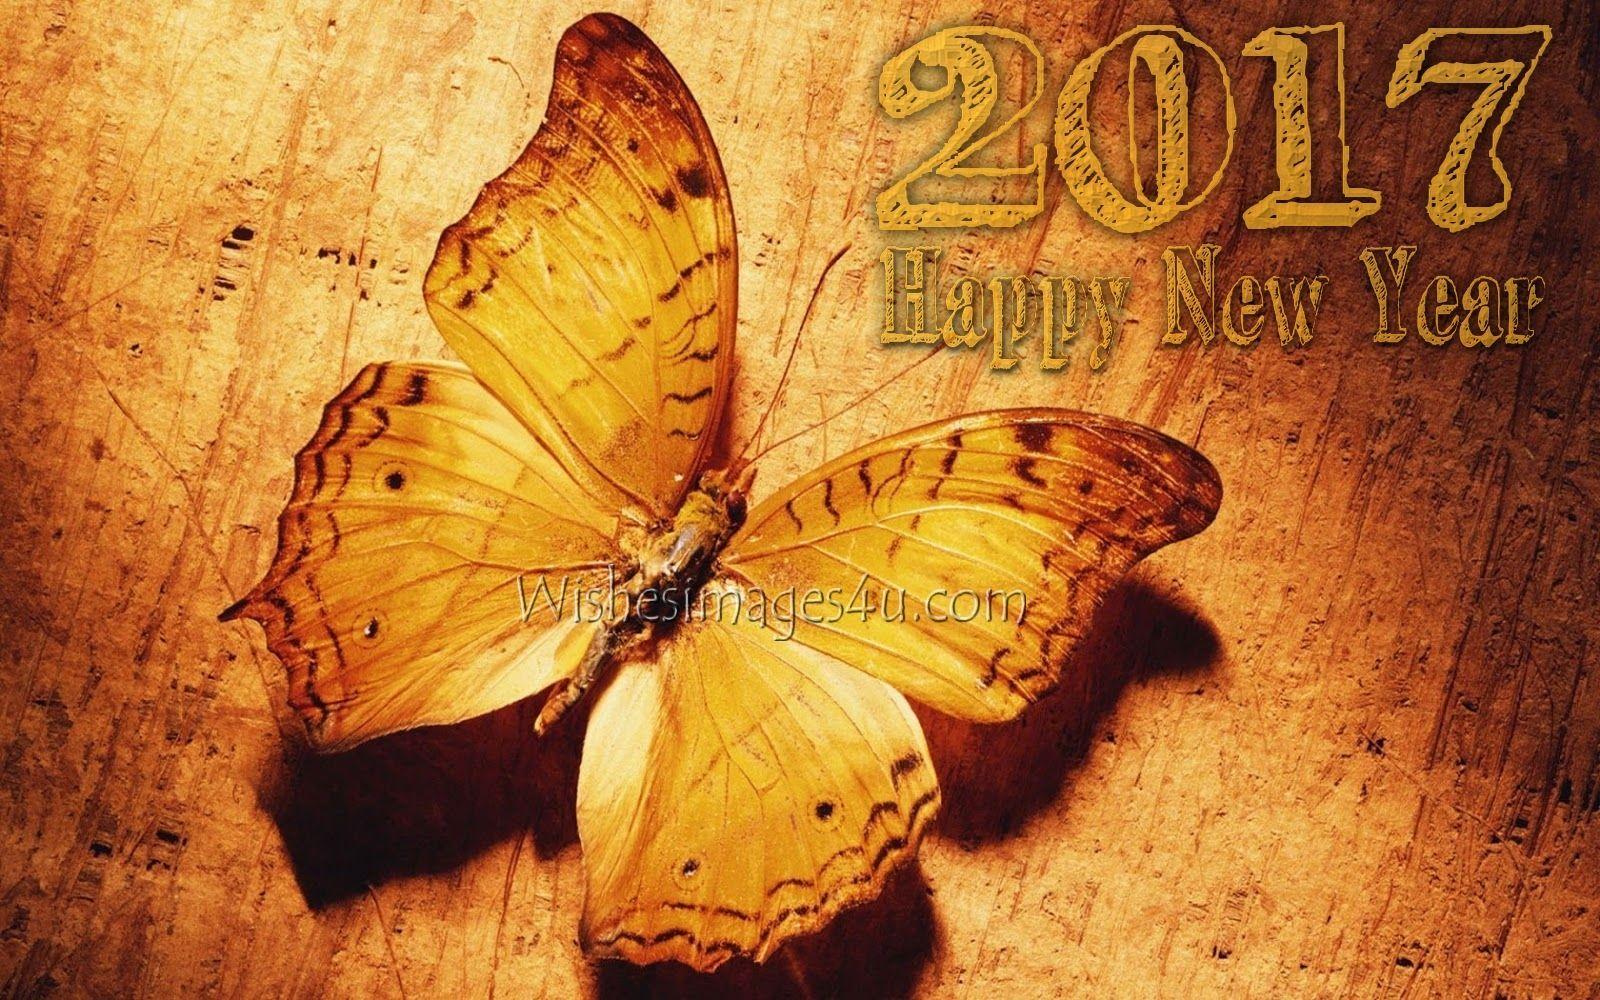 Happy New Year 2017 3D Full HD Image Download Year 2017 3D